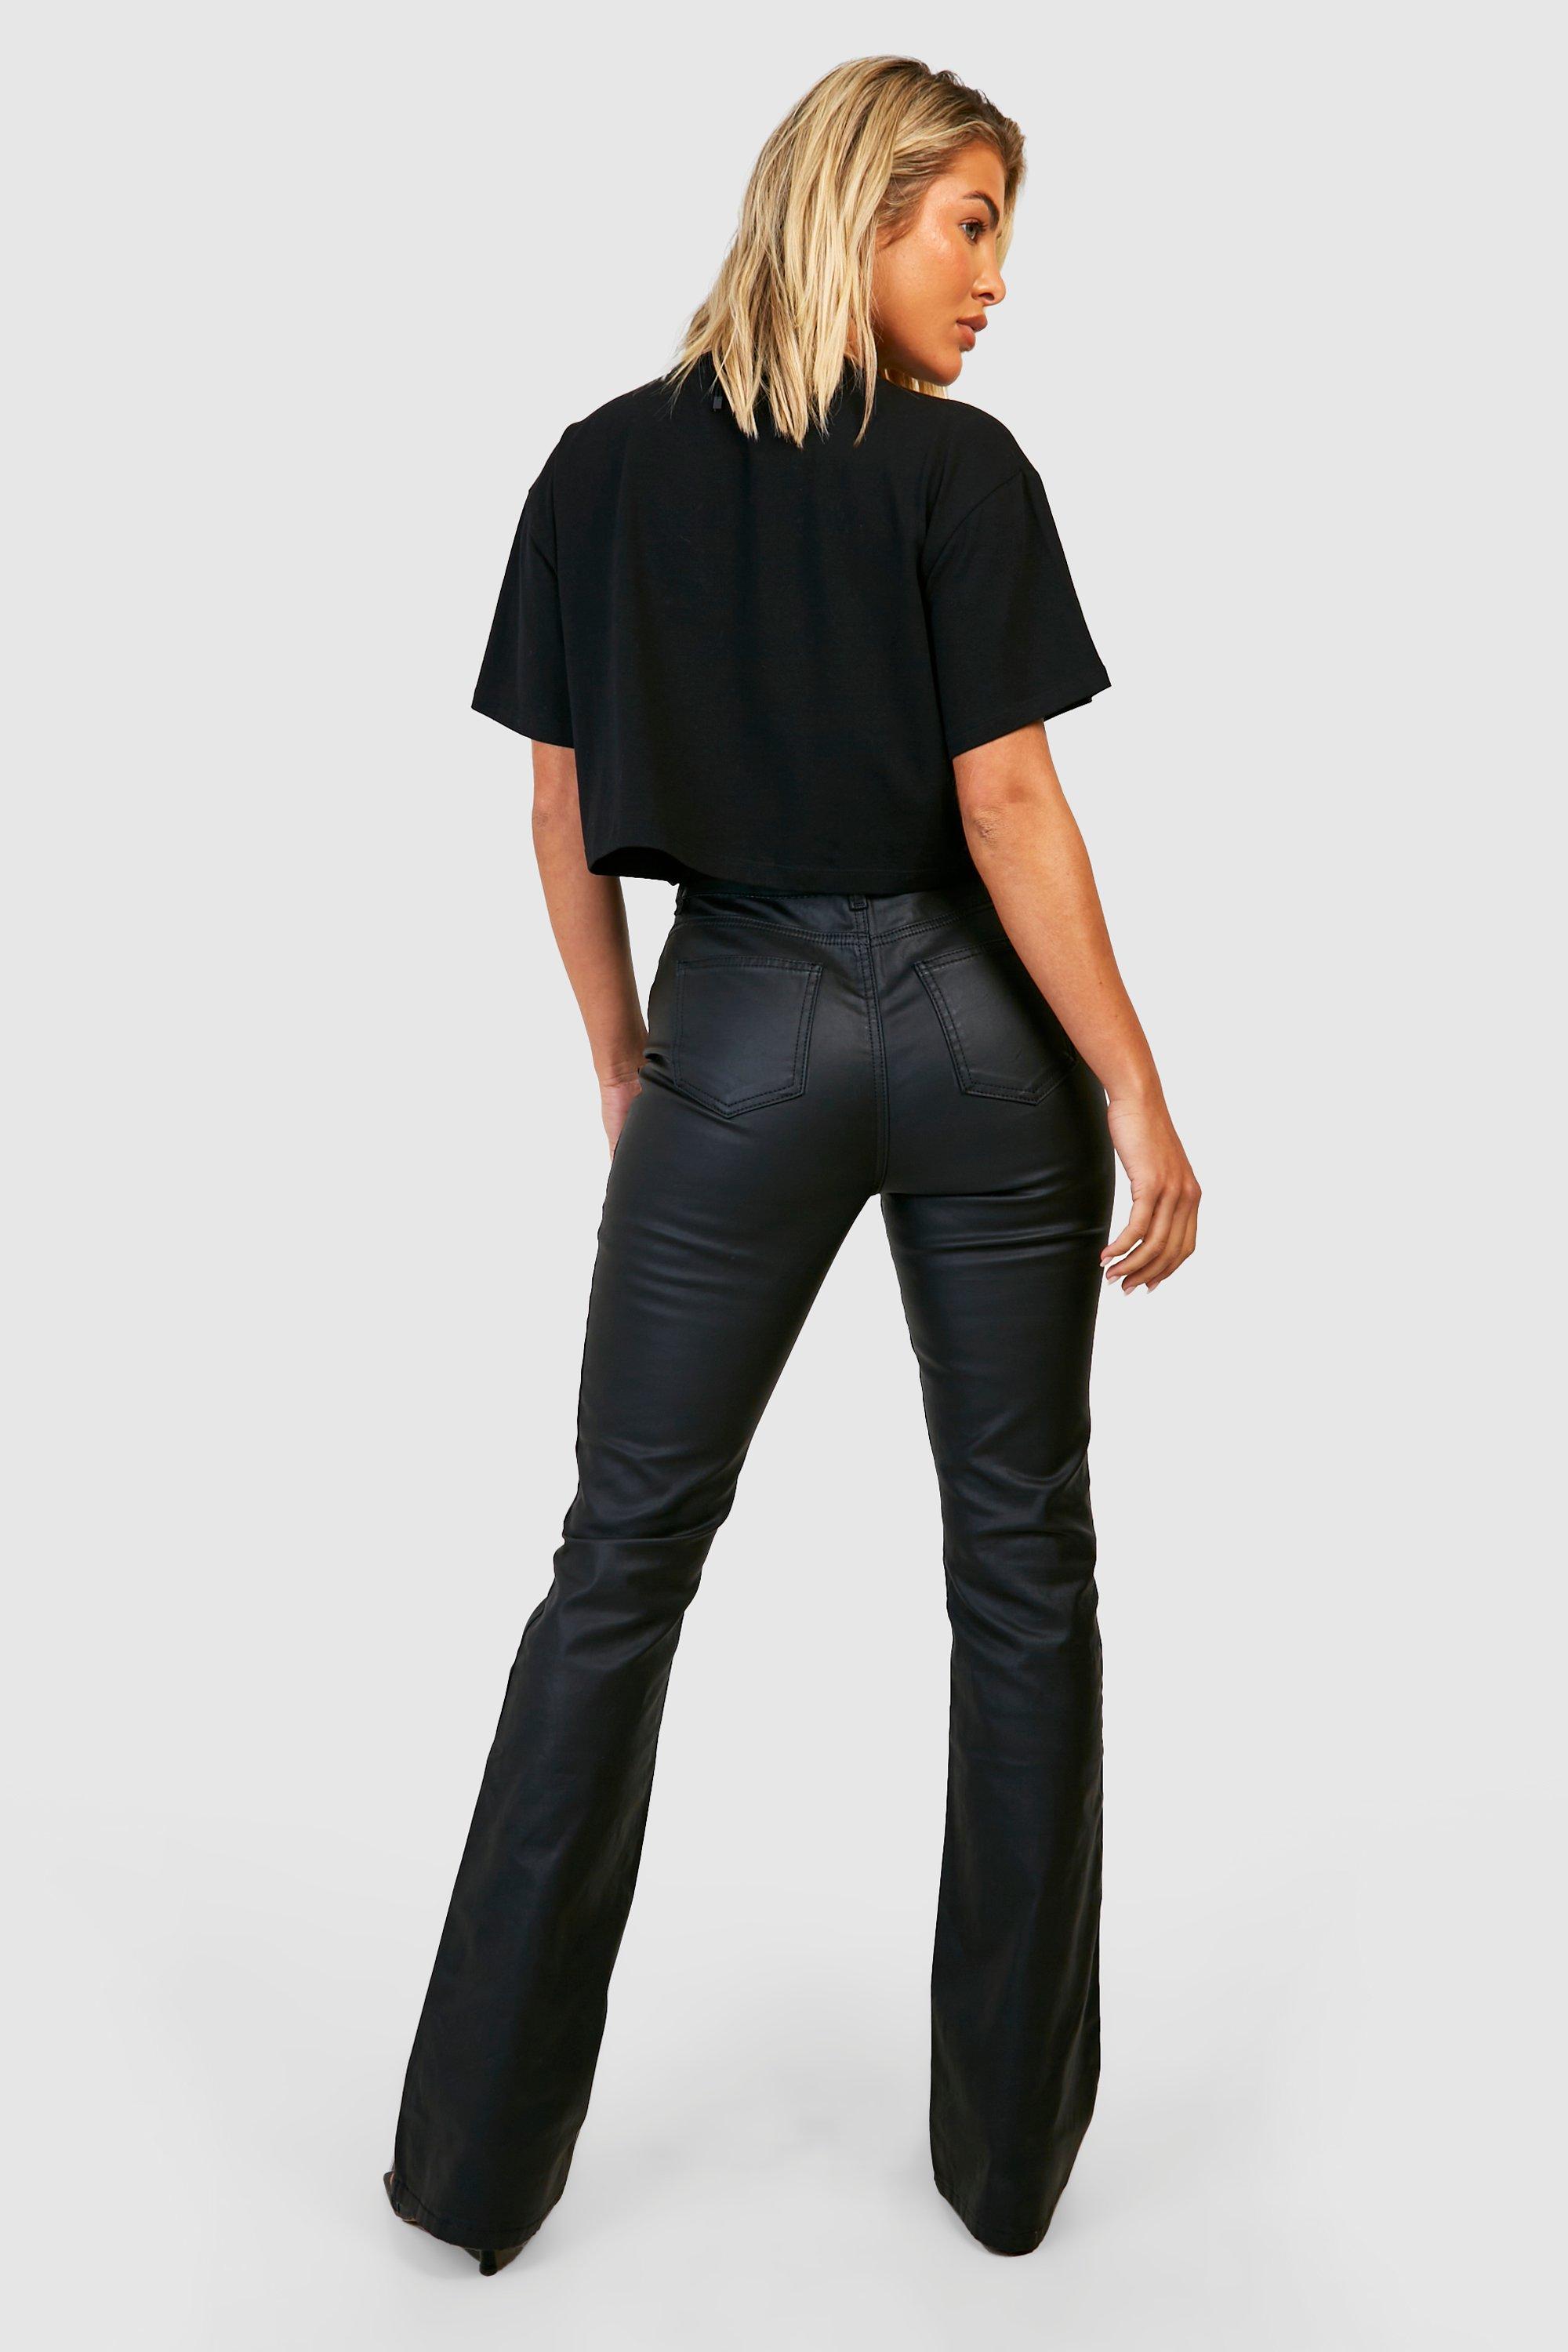 black coated jeans